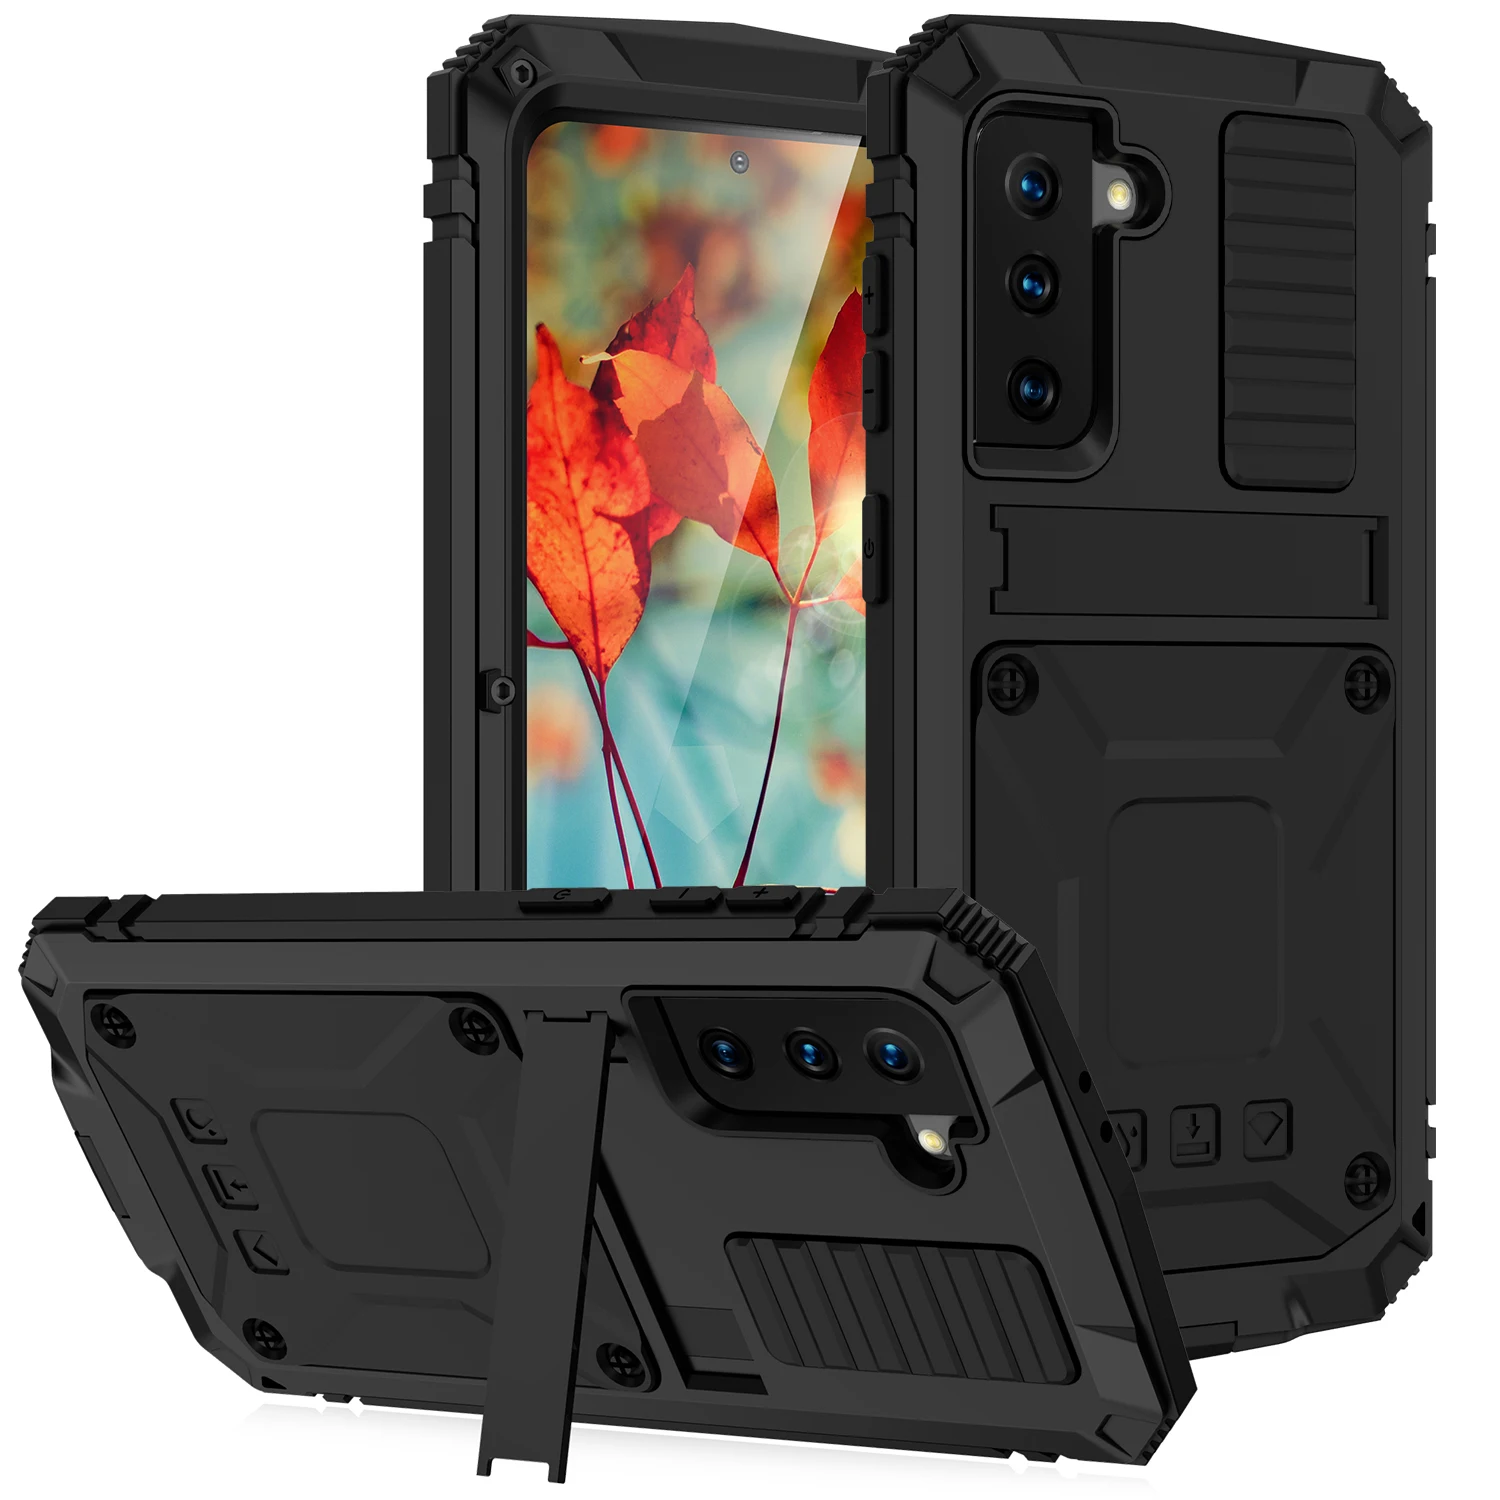 

New Heavy Duty Armor Kickstand For Samsung Galaxy S21 Plus Dustproof Shockproof Glass For Samsung S21 Ultra CASE Cover